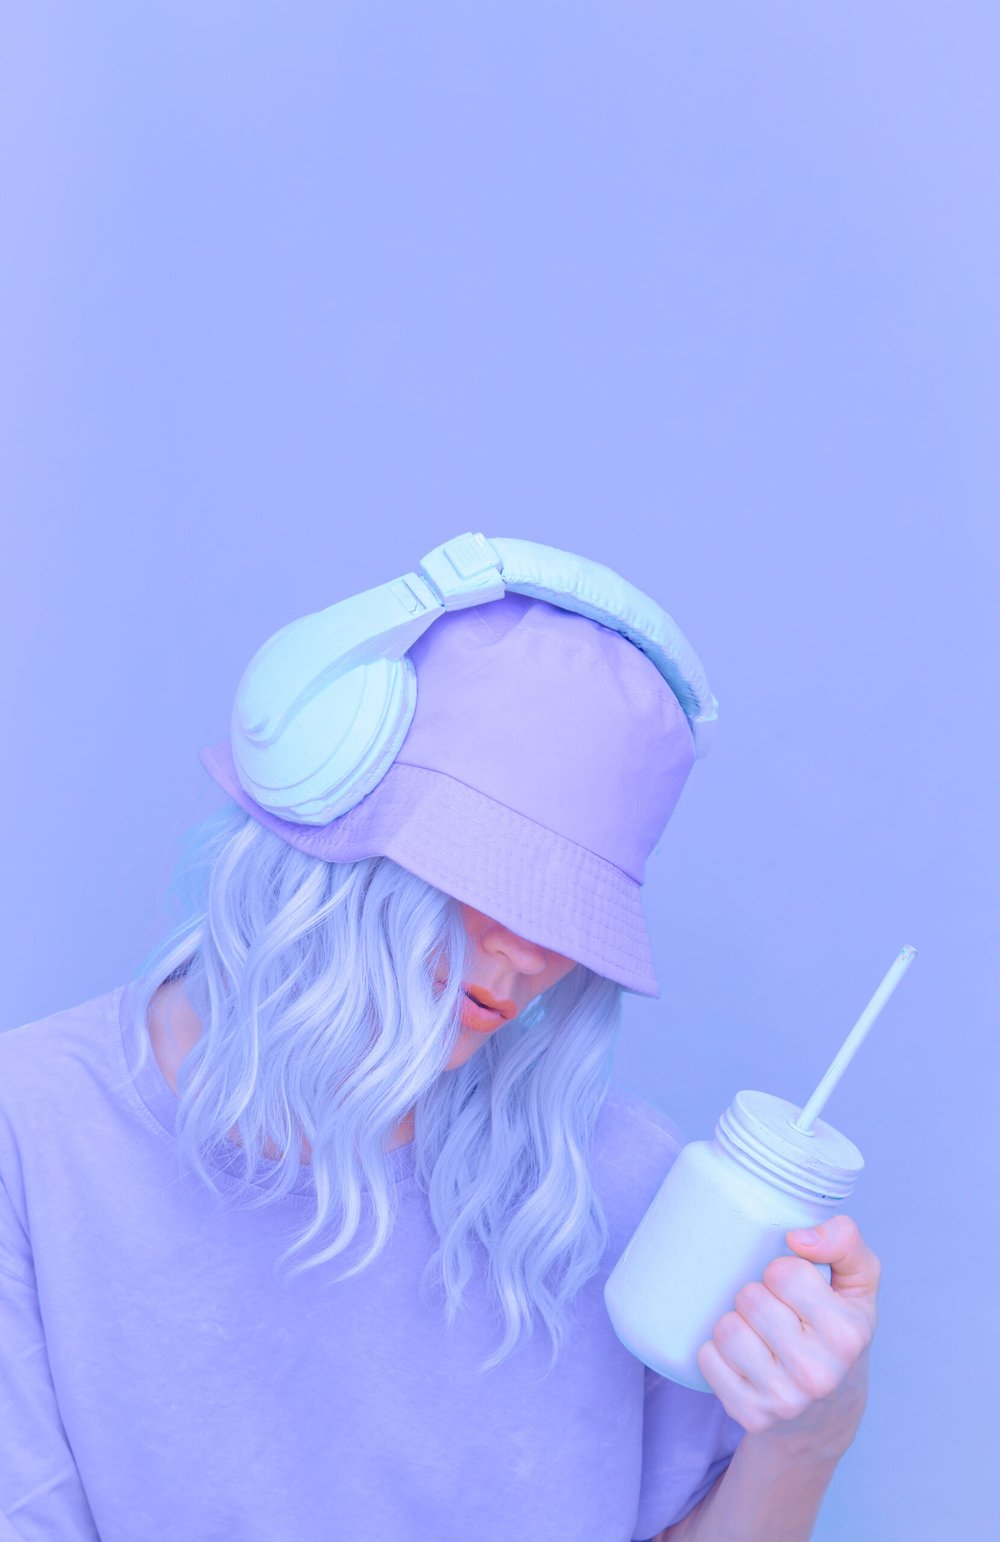 ice-smoothie-dj-girl-in-stylish-headphones-and-buc-QYX8S8R-scaled.jpg